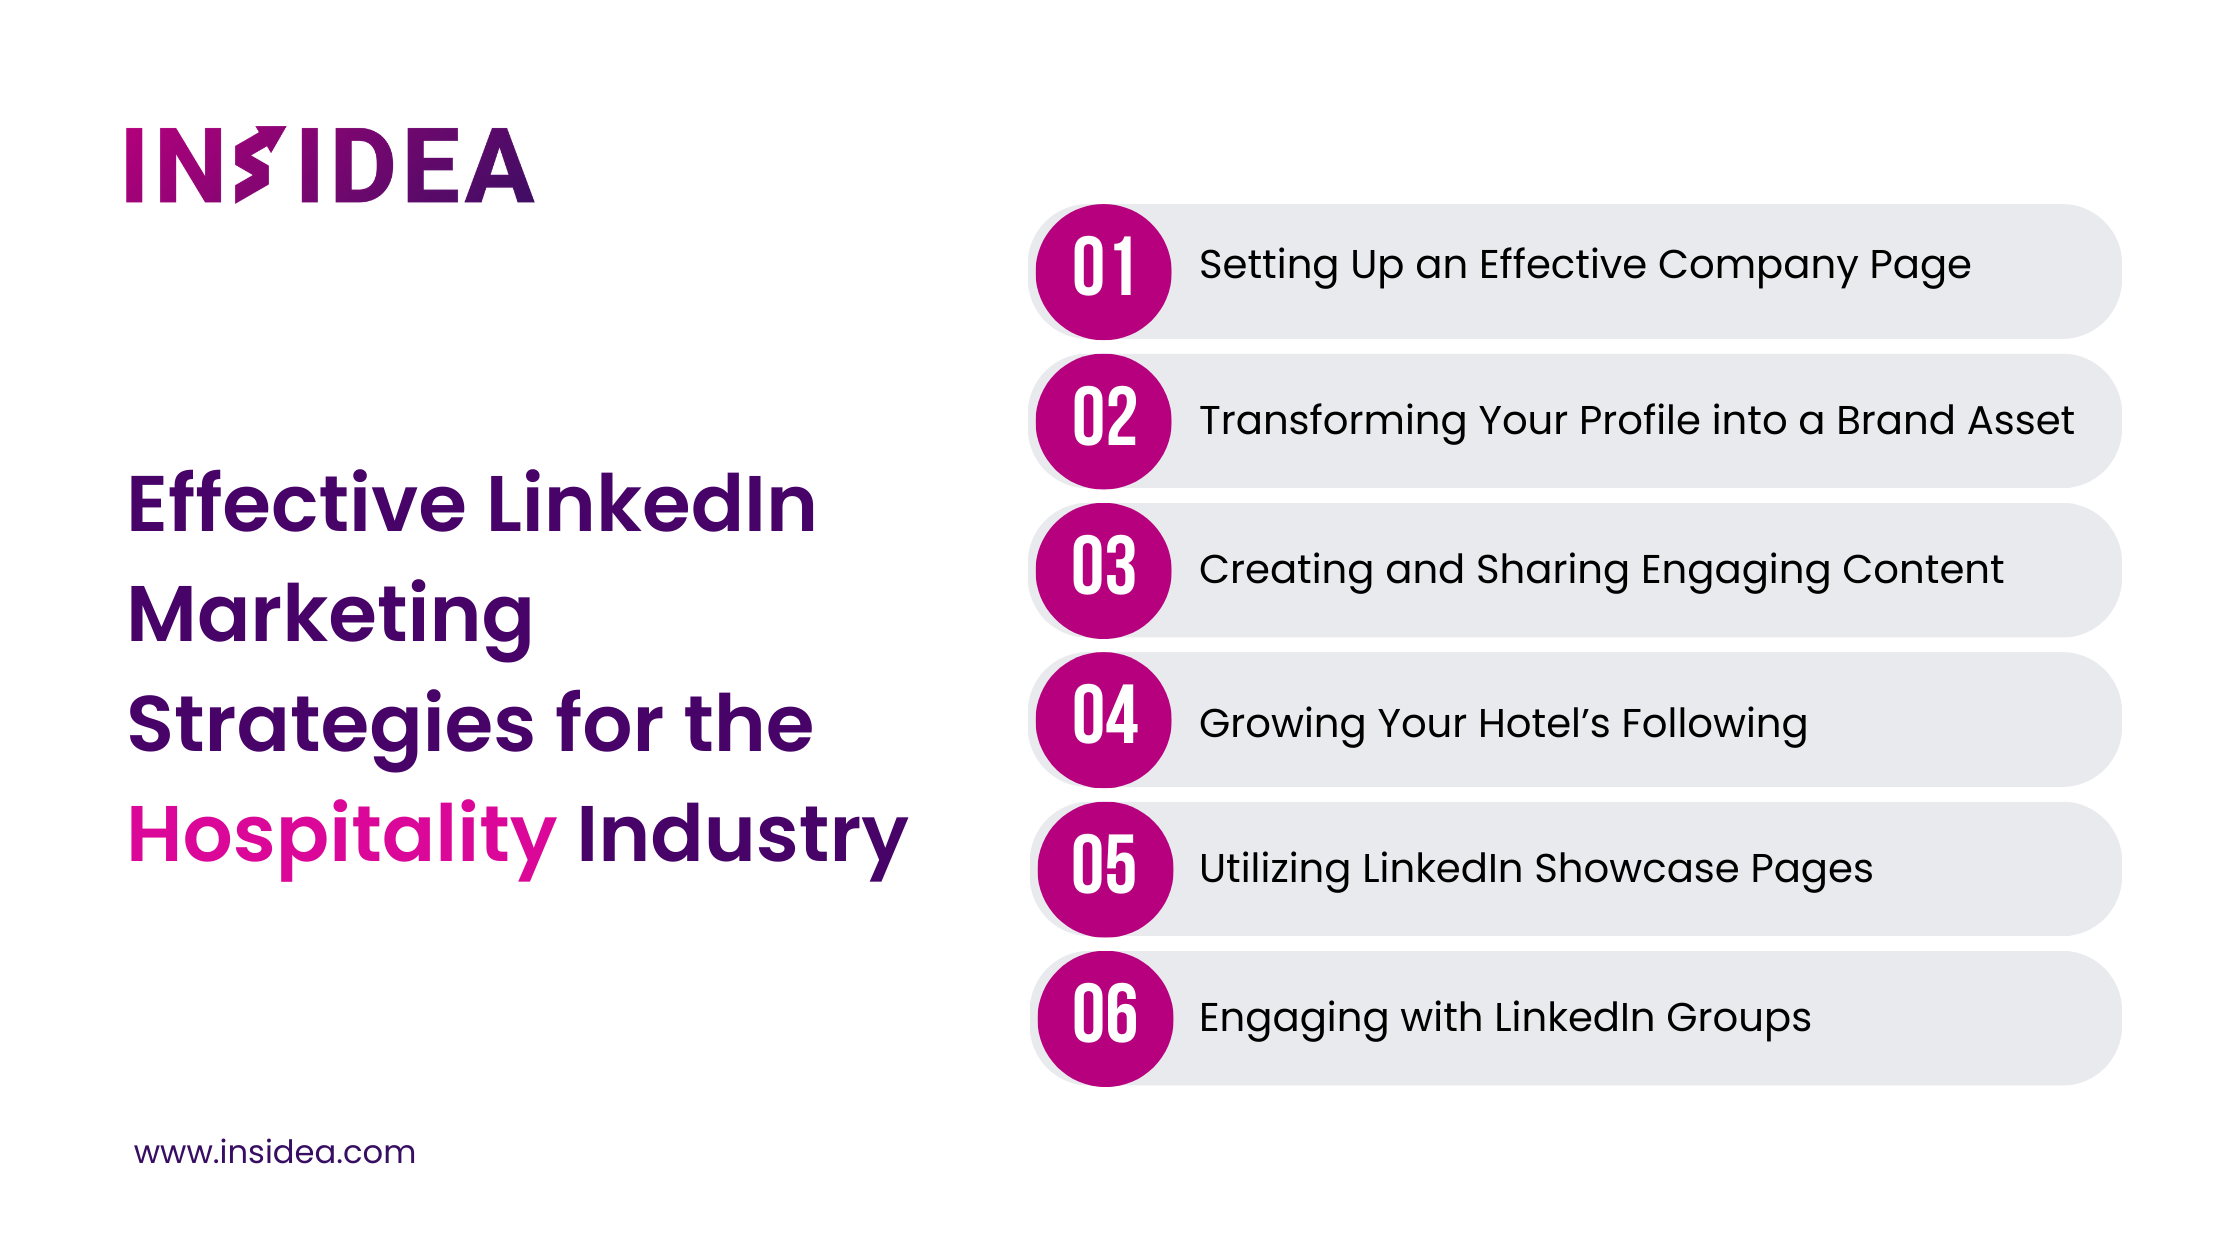 Effective LinkedIn Marketing Strategies for the Hospitality Industry